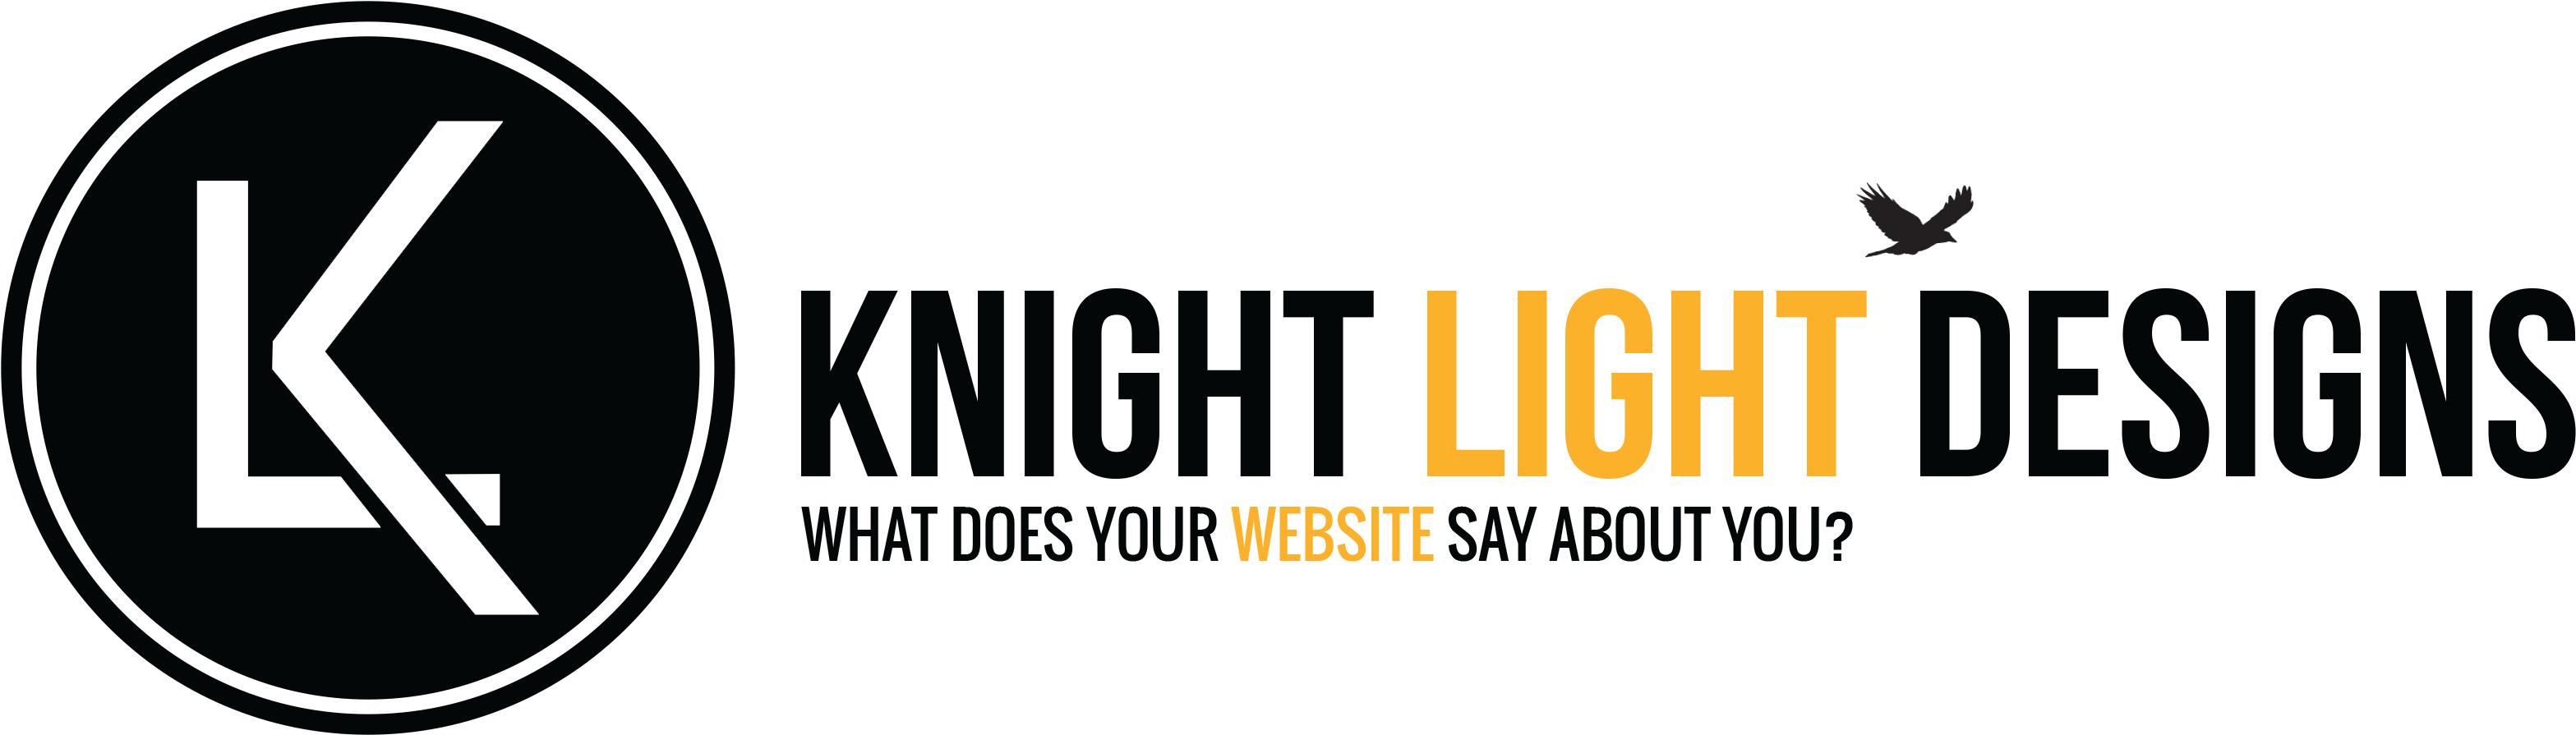 Knight Light Designs - Amber (3142x910), Png Download